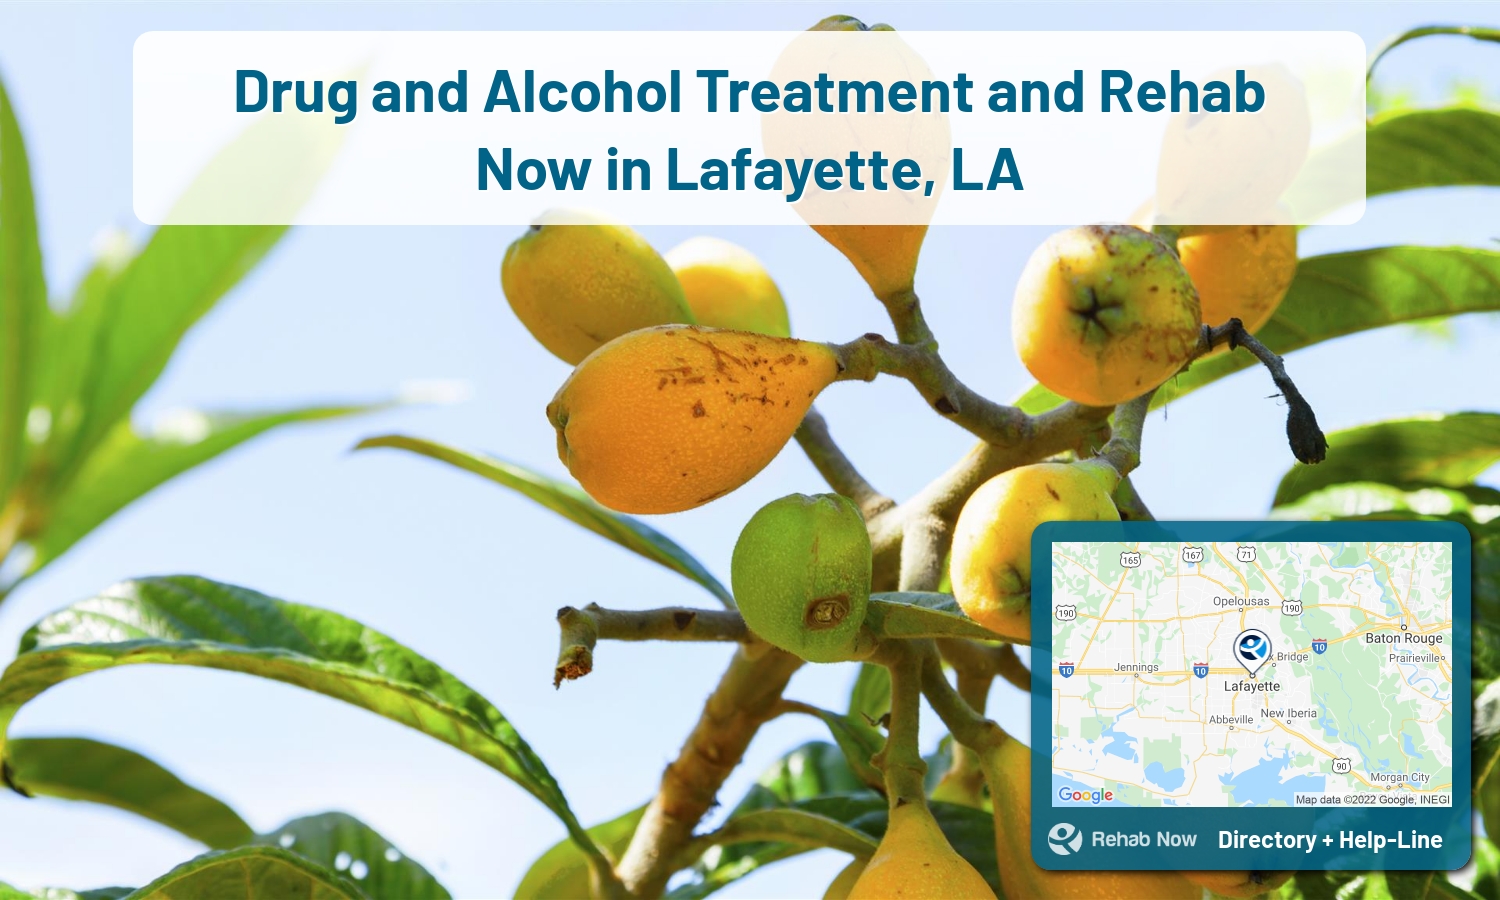 Lafayette, LA Treatment Centers. Find drug rehab in Lafayette, Louisiana, or detox and treatment programs. Get the right help now!